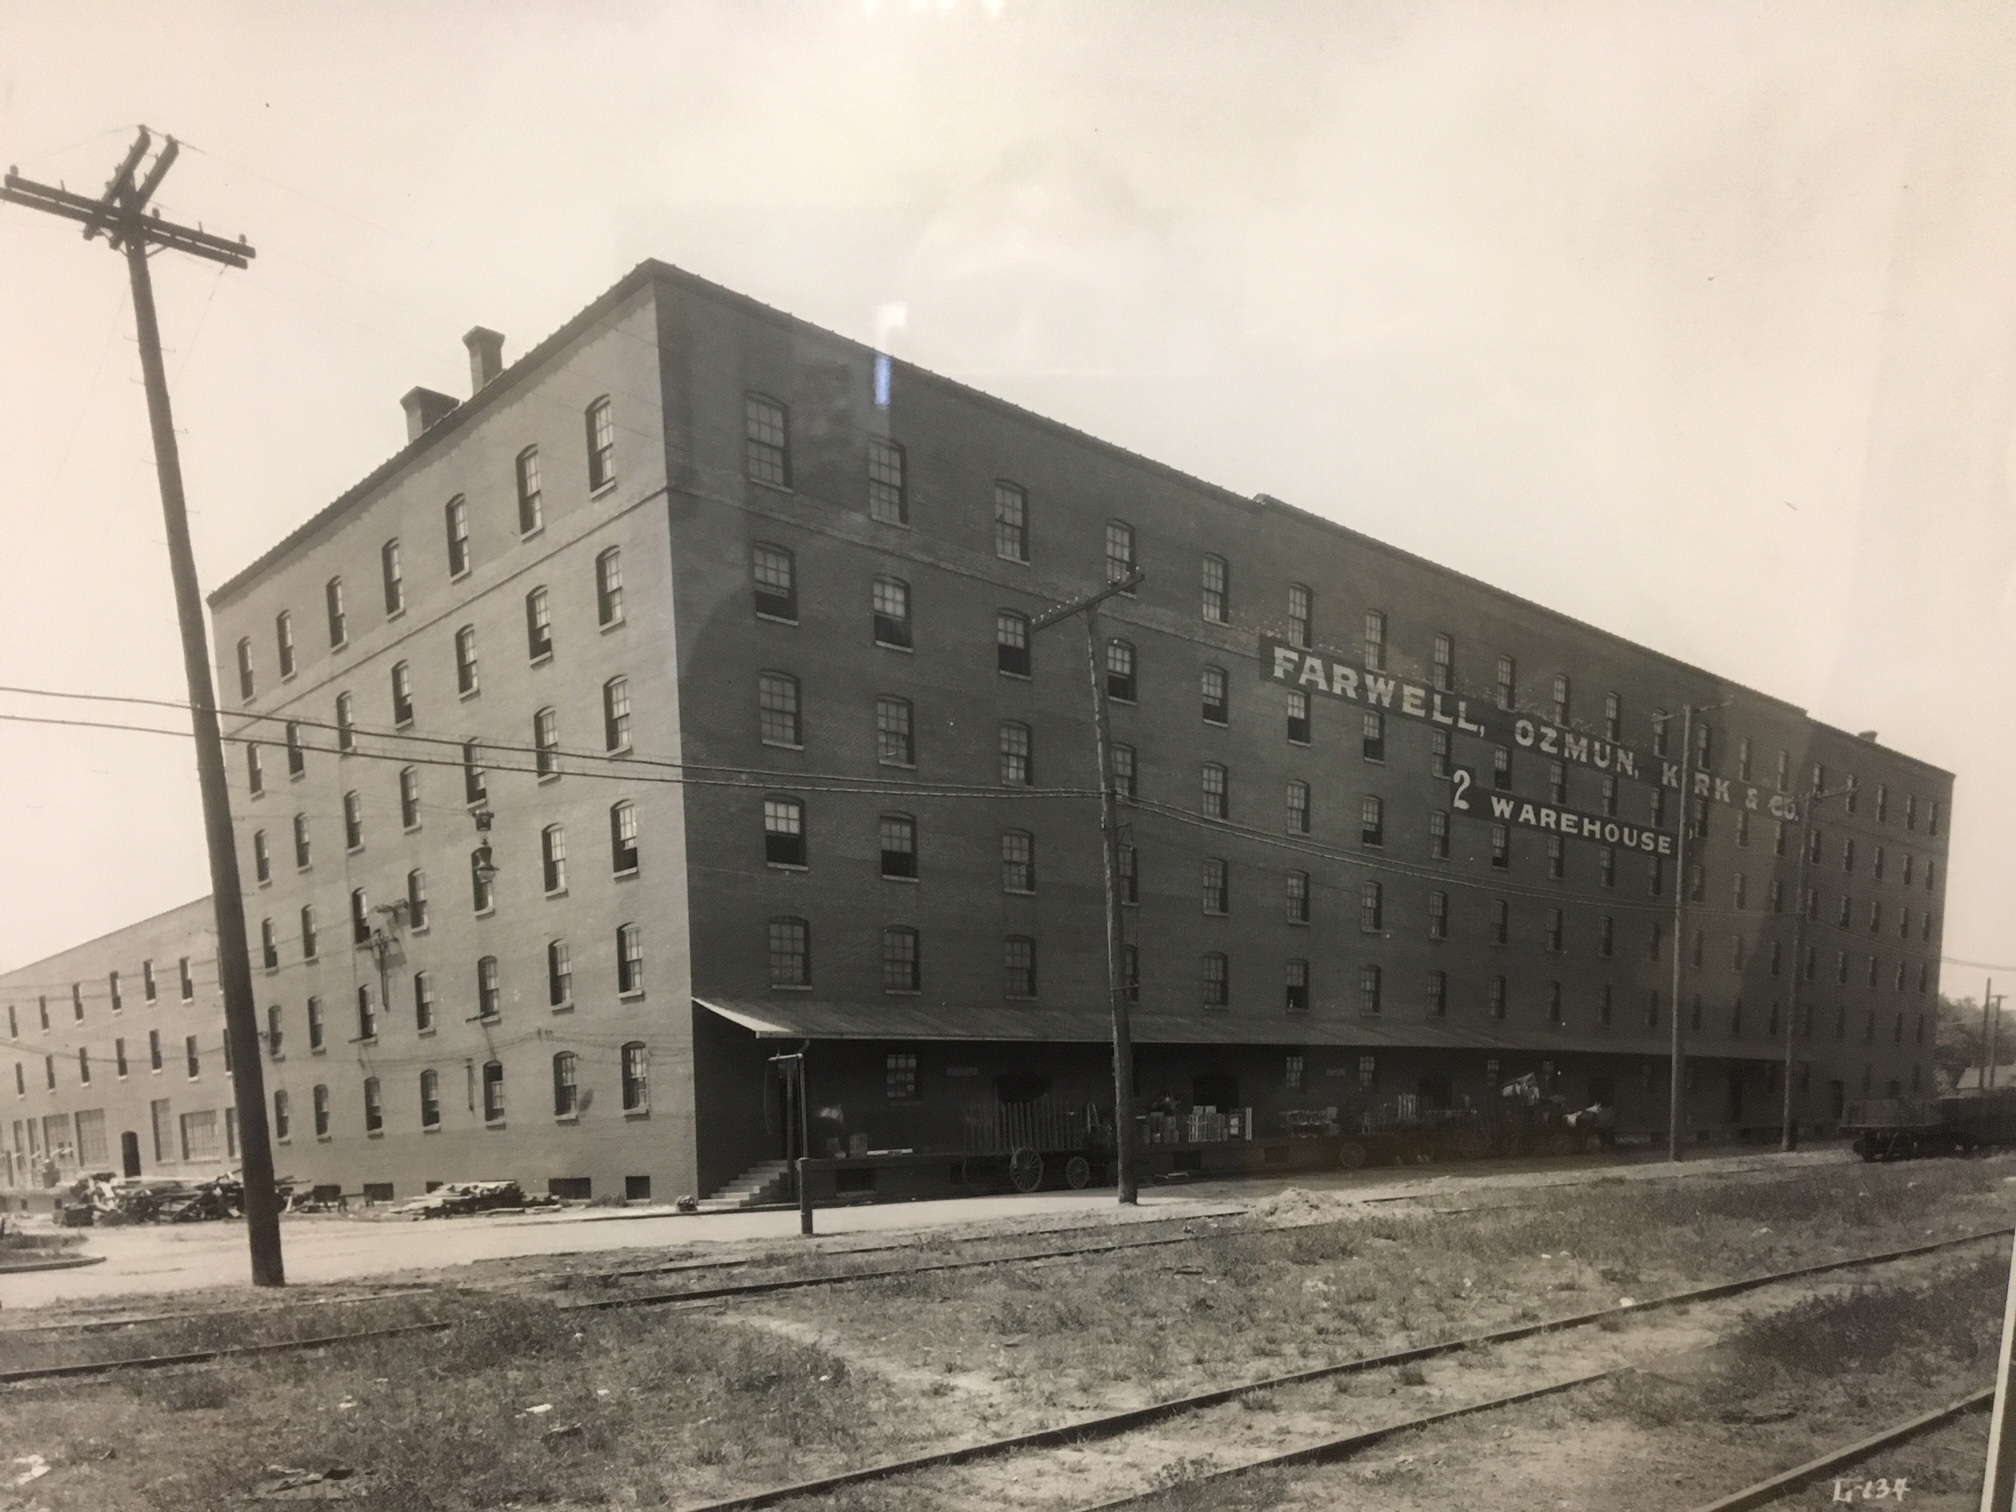 Historic photo for old Farwell, Ozmun, Kirk & Co. Warehouse 2 building